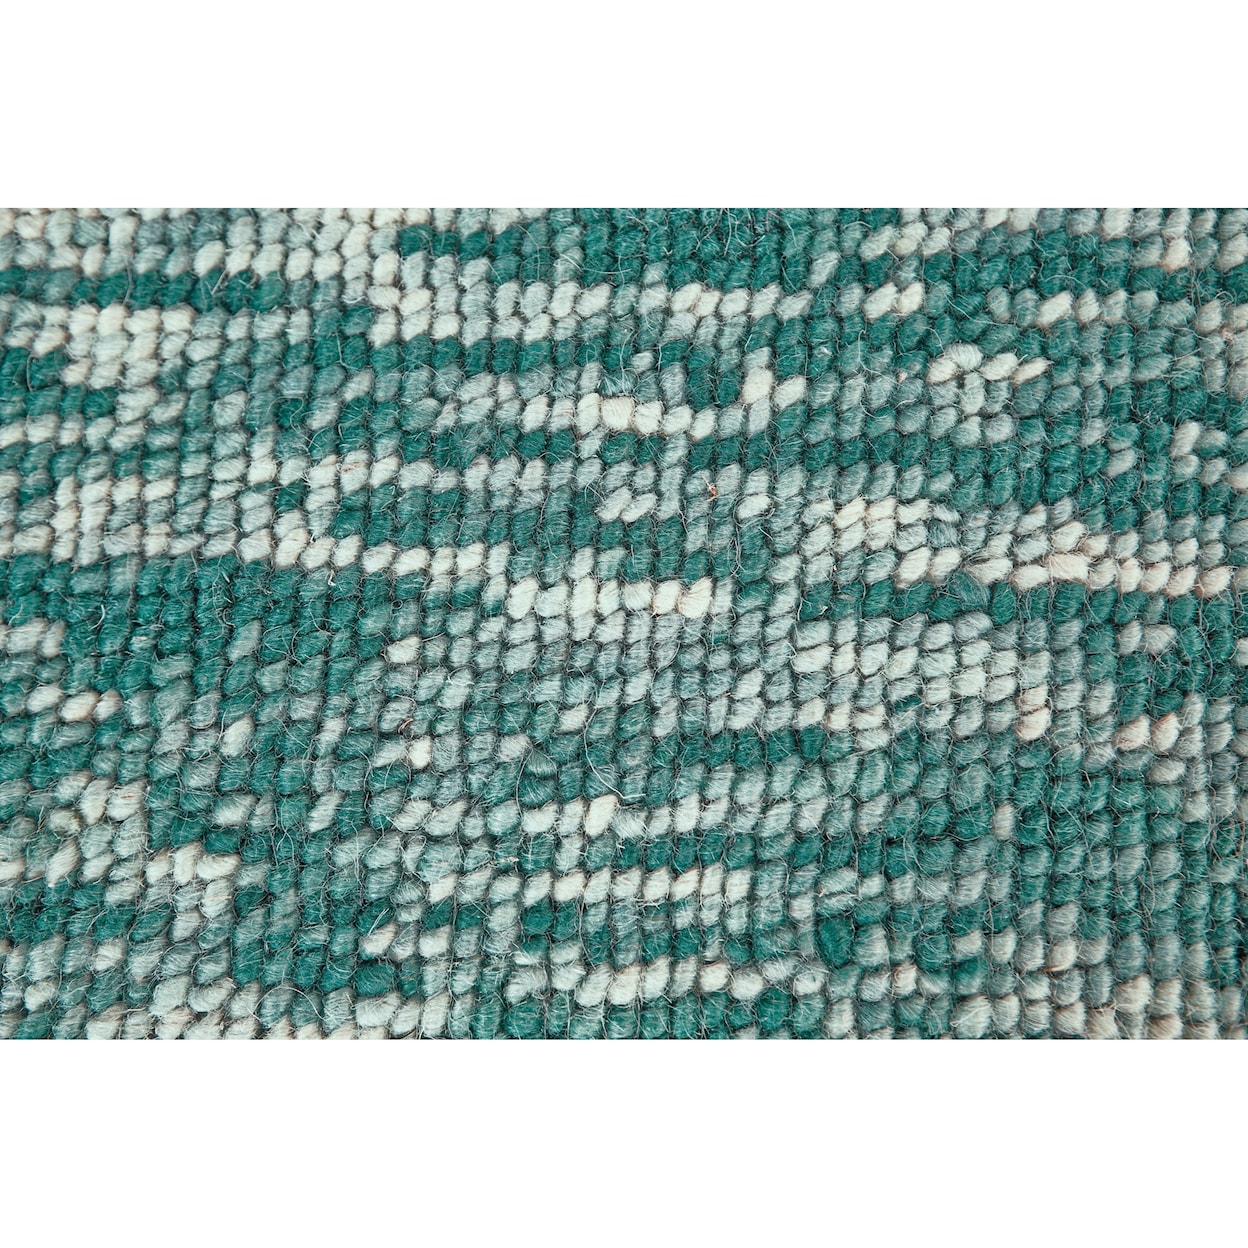 Feizy Rugs Cora Teal 2'-6" x 8' Runner Rug